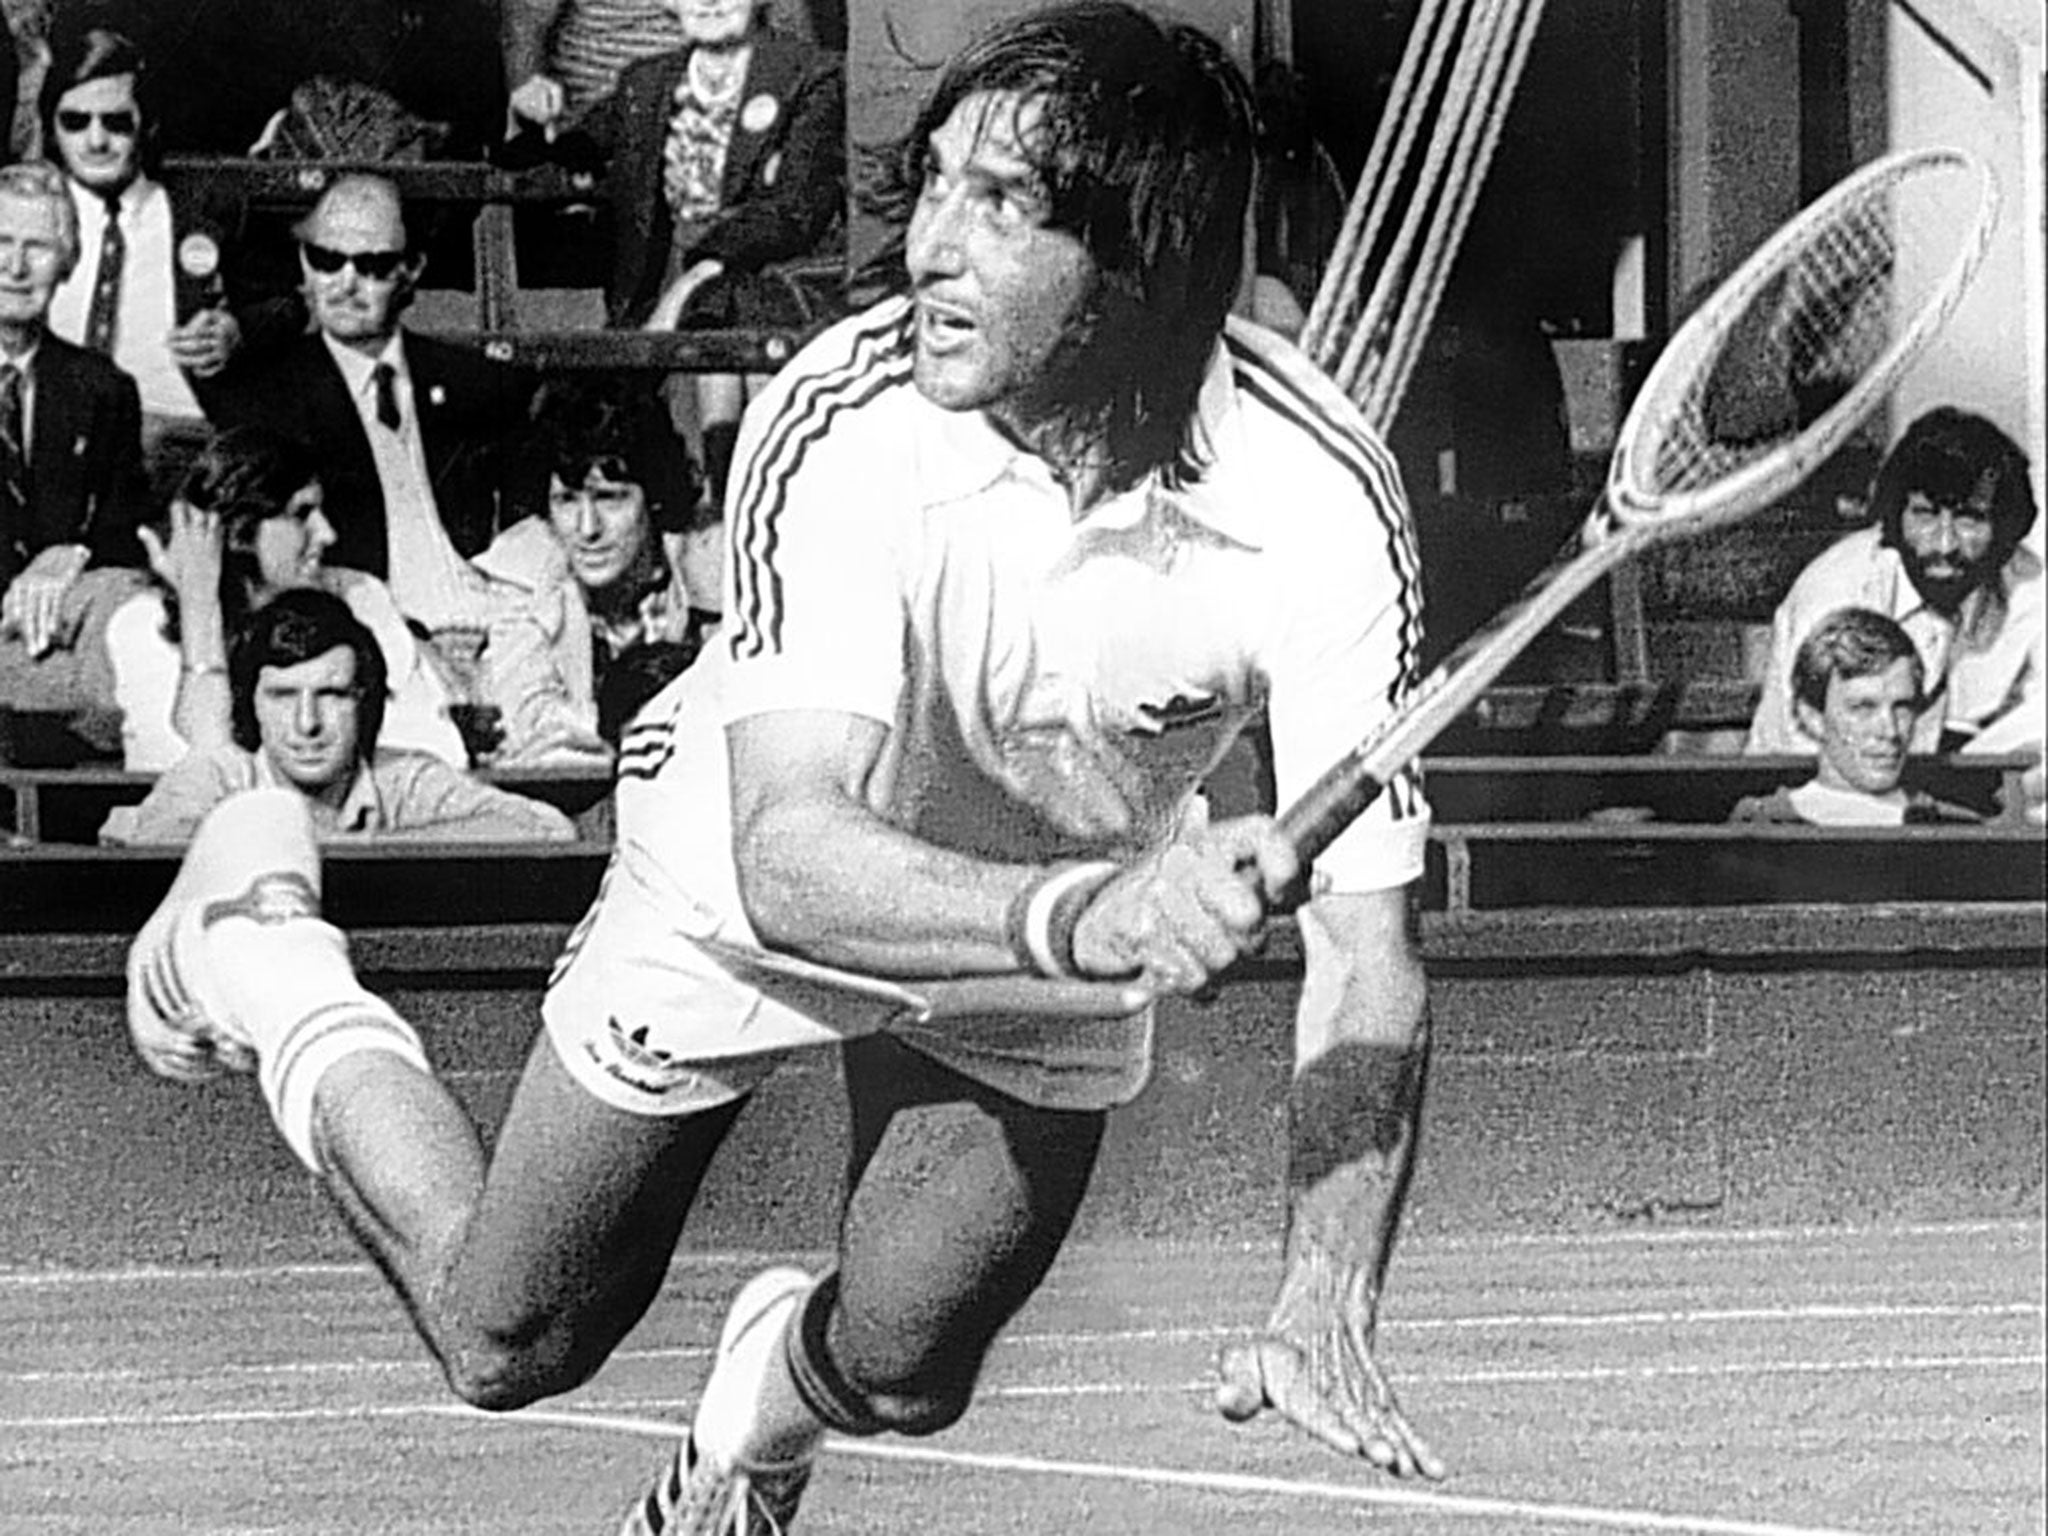 There was never a dull moment with Ilie Nastase on court in his Seventies heyday